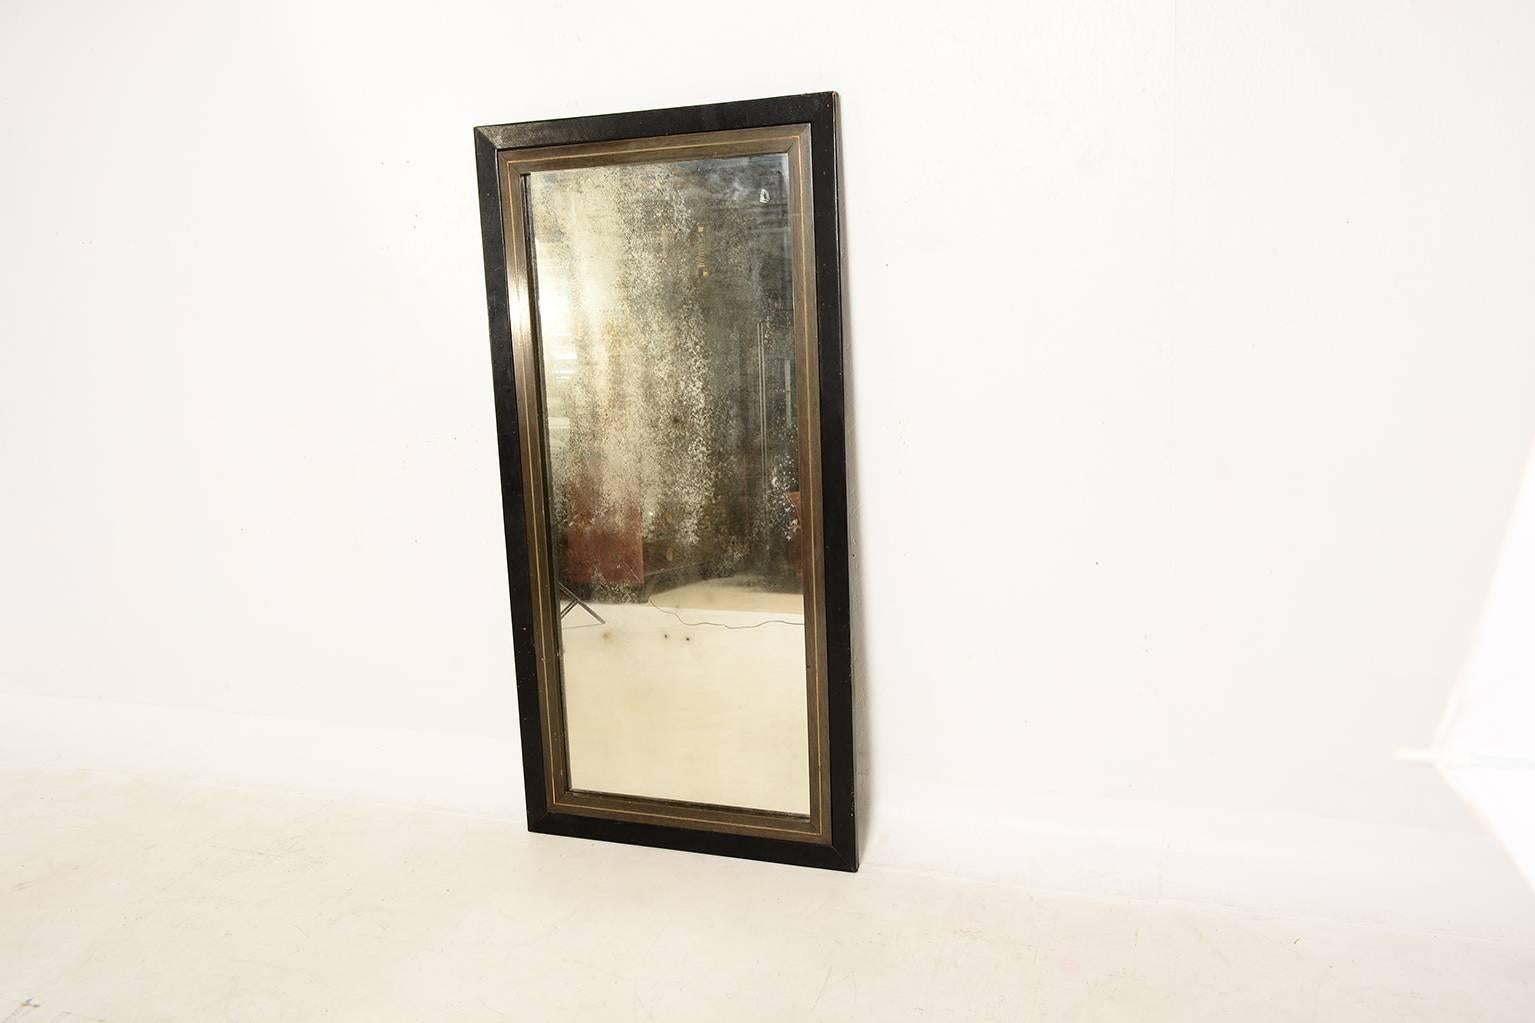 For your consideration a vintage wall hanging mirror wrapped in leather. Mahogany wood with brass accent inserts. 

Original mirror has vintage oxidation which gives a great character. 